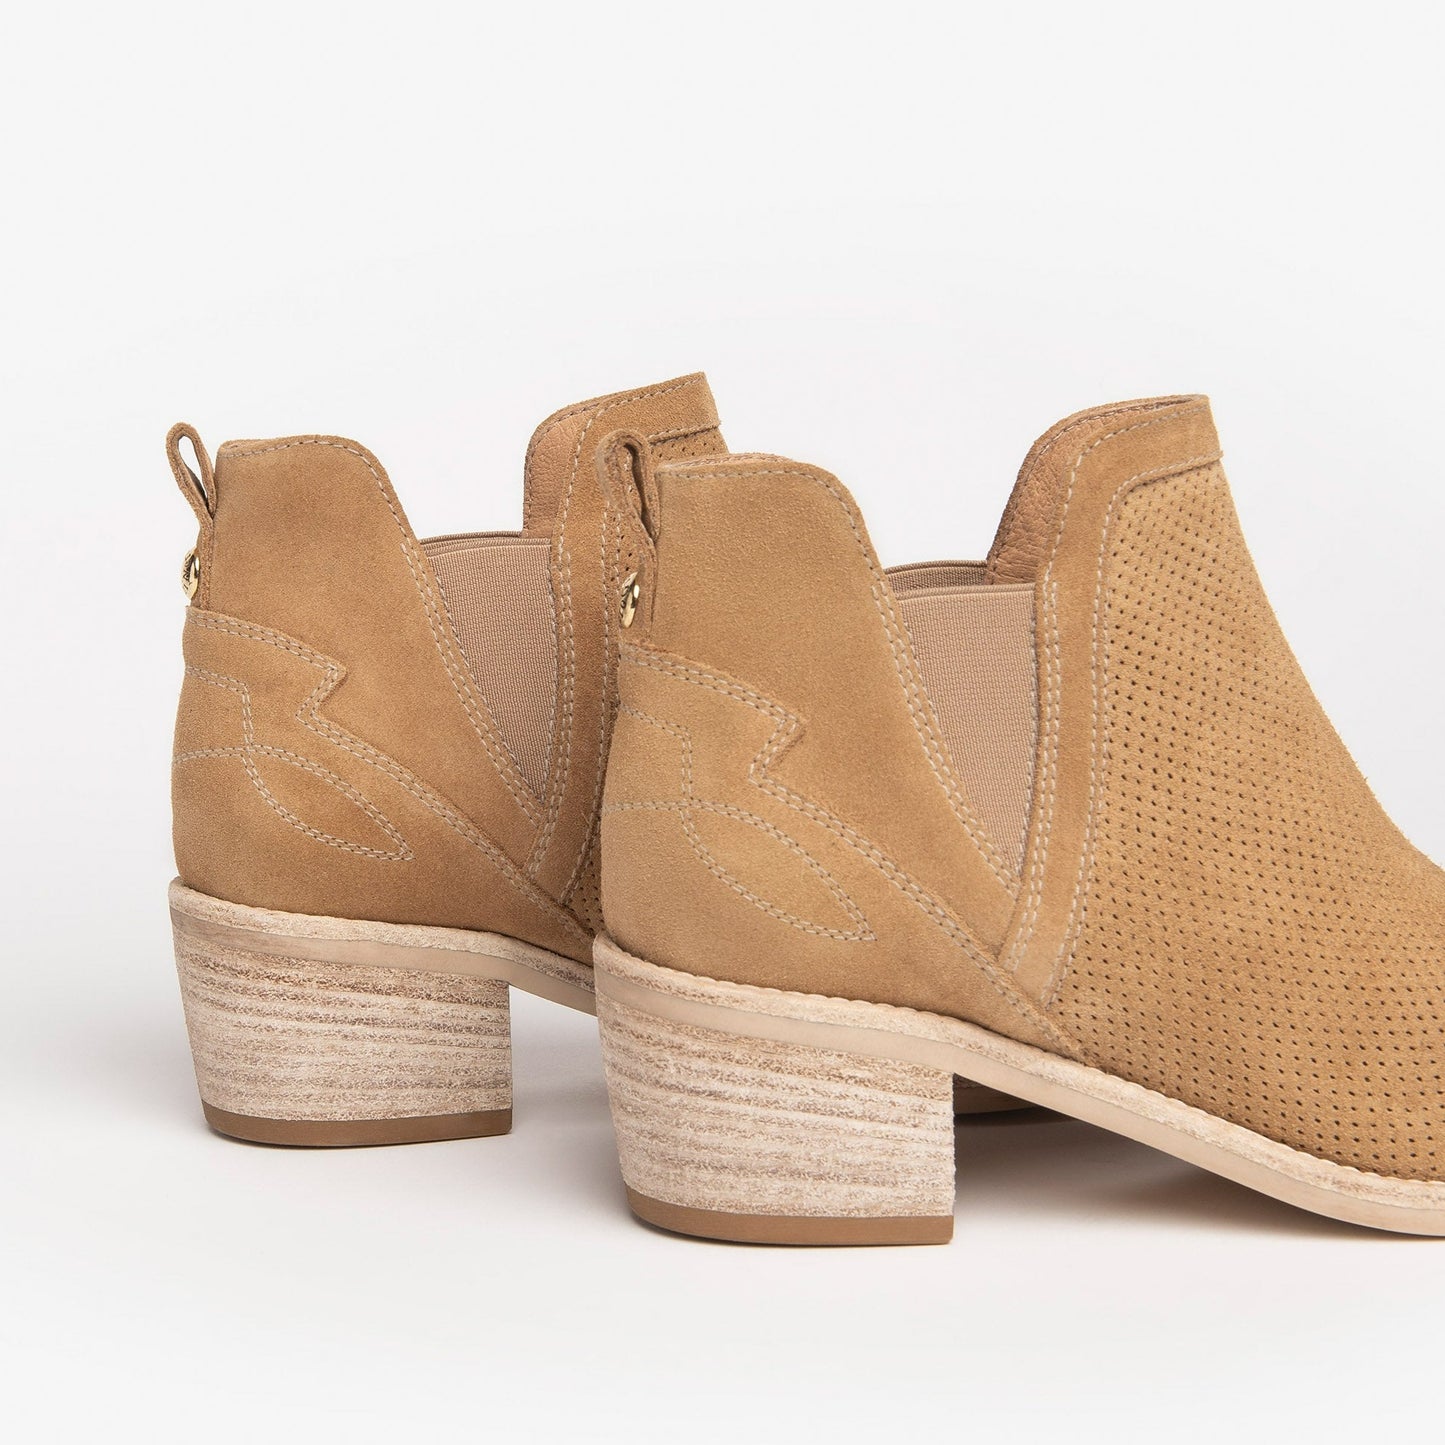 Ankle boots NeroGiardini woman amber suede